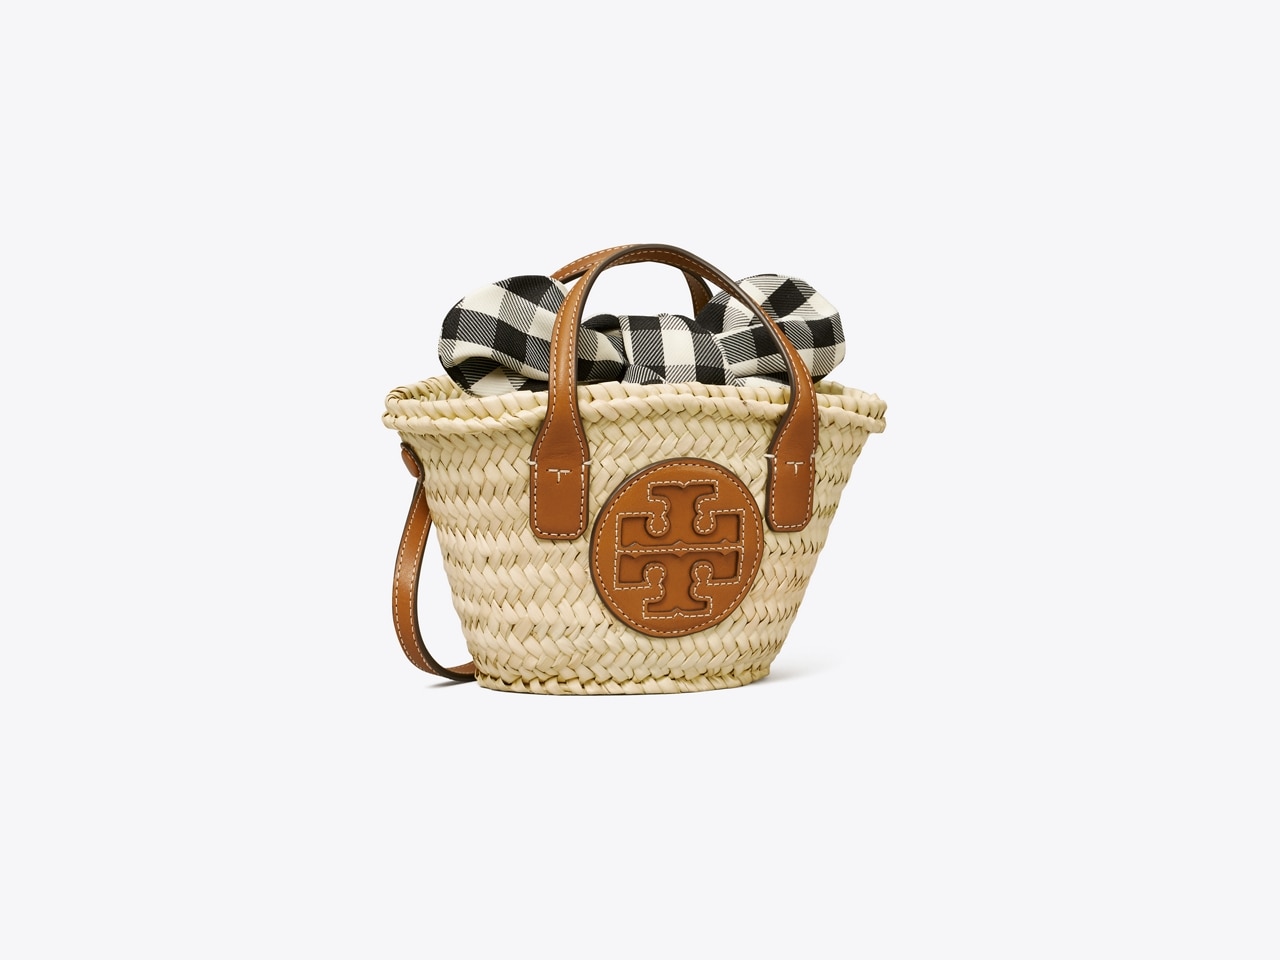 Tory Burch - The Ella Straw Micro Tote. The straw was hand-woven by women  artisans from Doum For Women, a women's weaving collective in Marrakech.  Doum gives more than 200 women financial